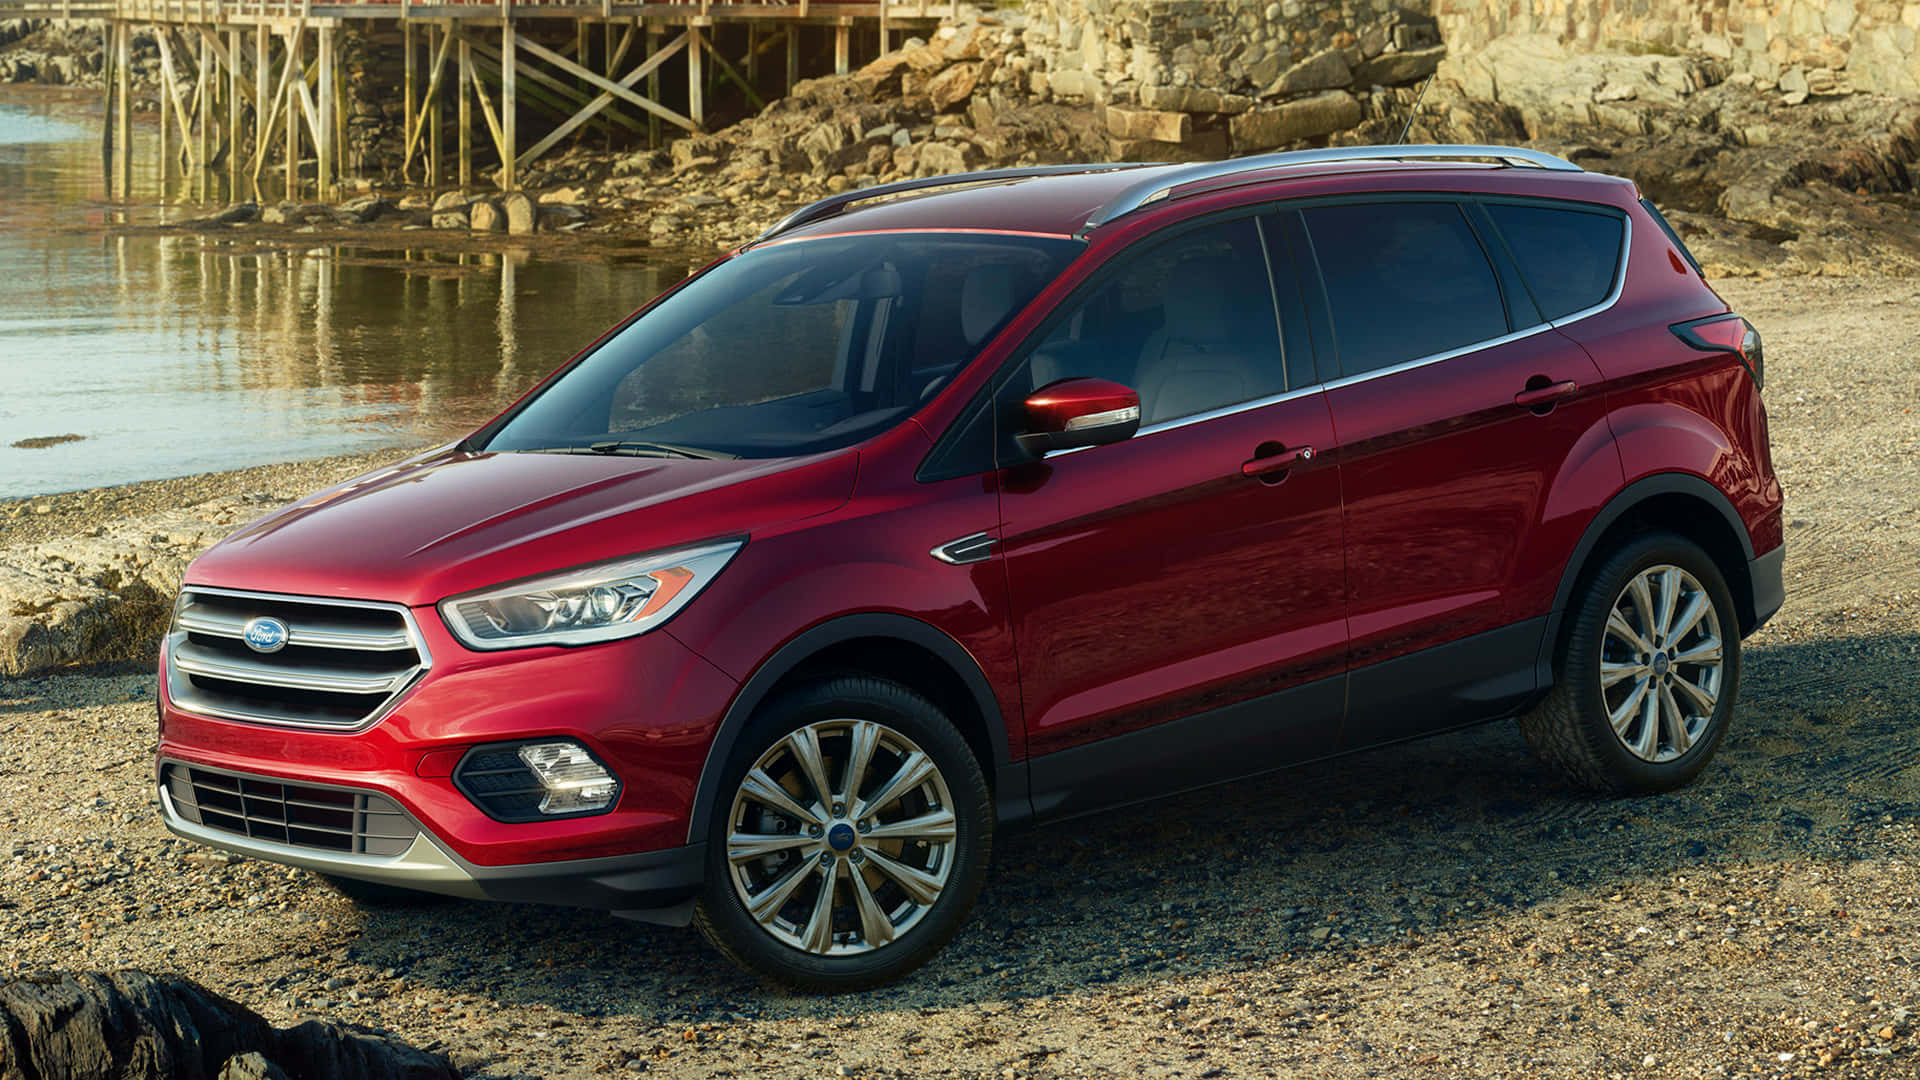 Sleek Ford Escape on a Scenic Road Wallpaper